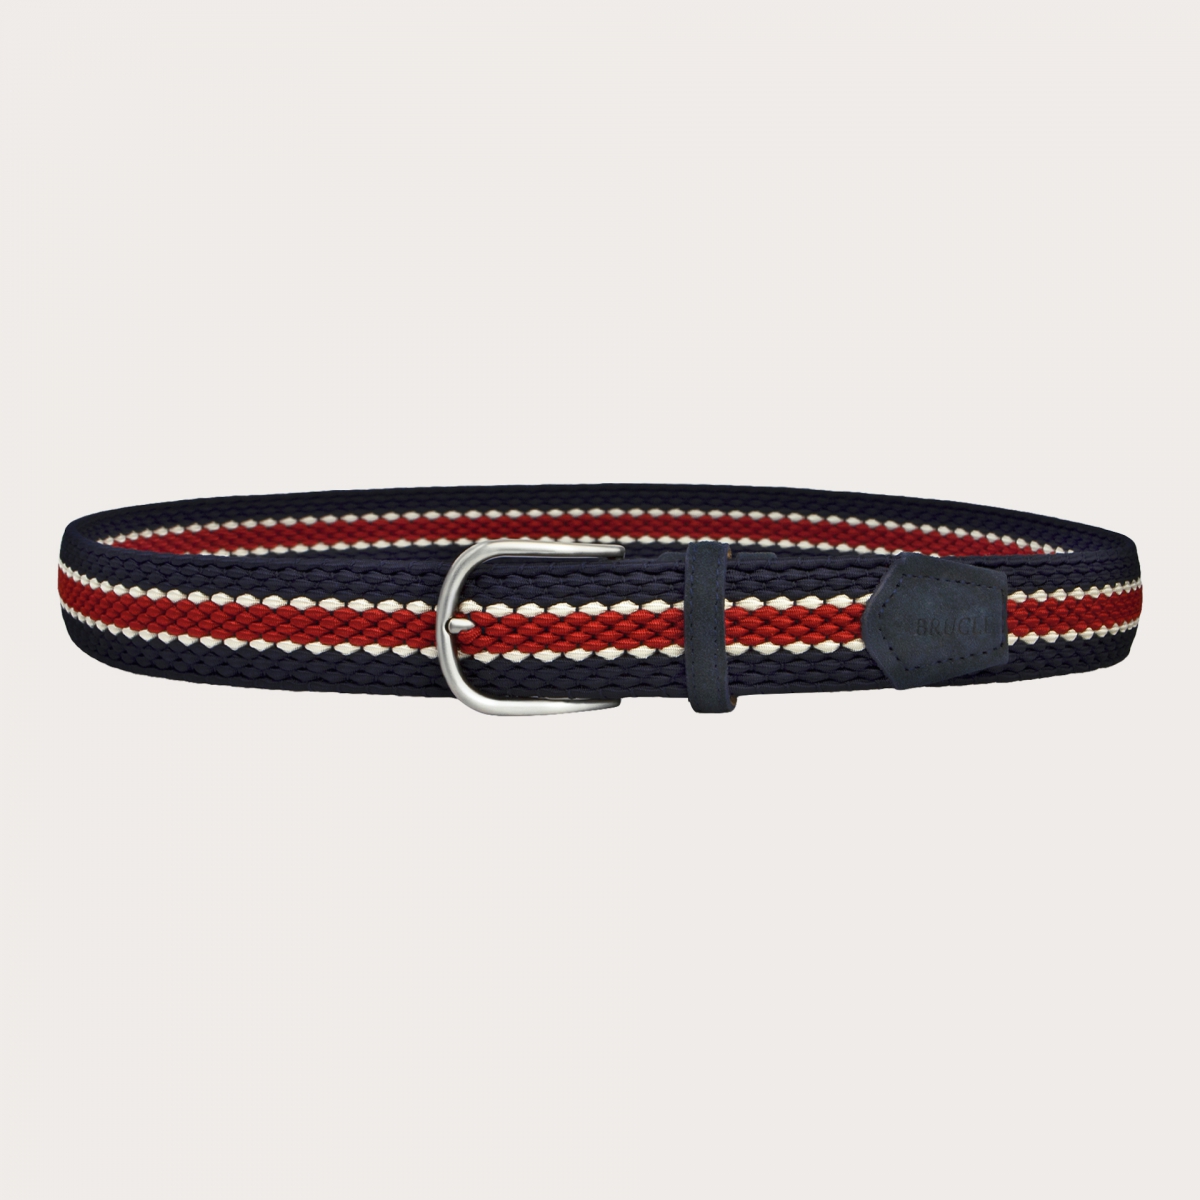 BRUCLE Braided elastic blue red and white belt